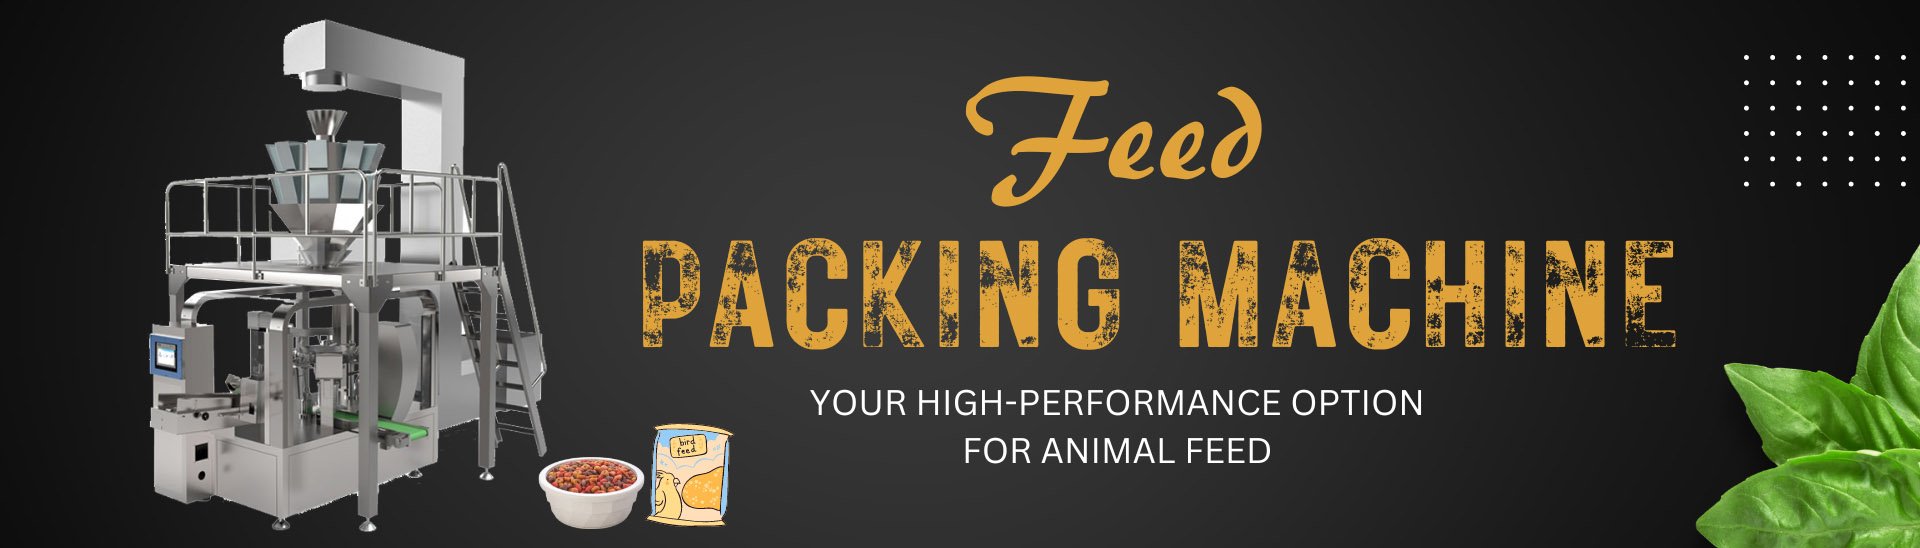 Feed Packing Machine Banner